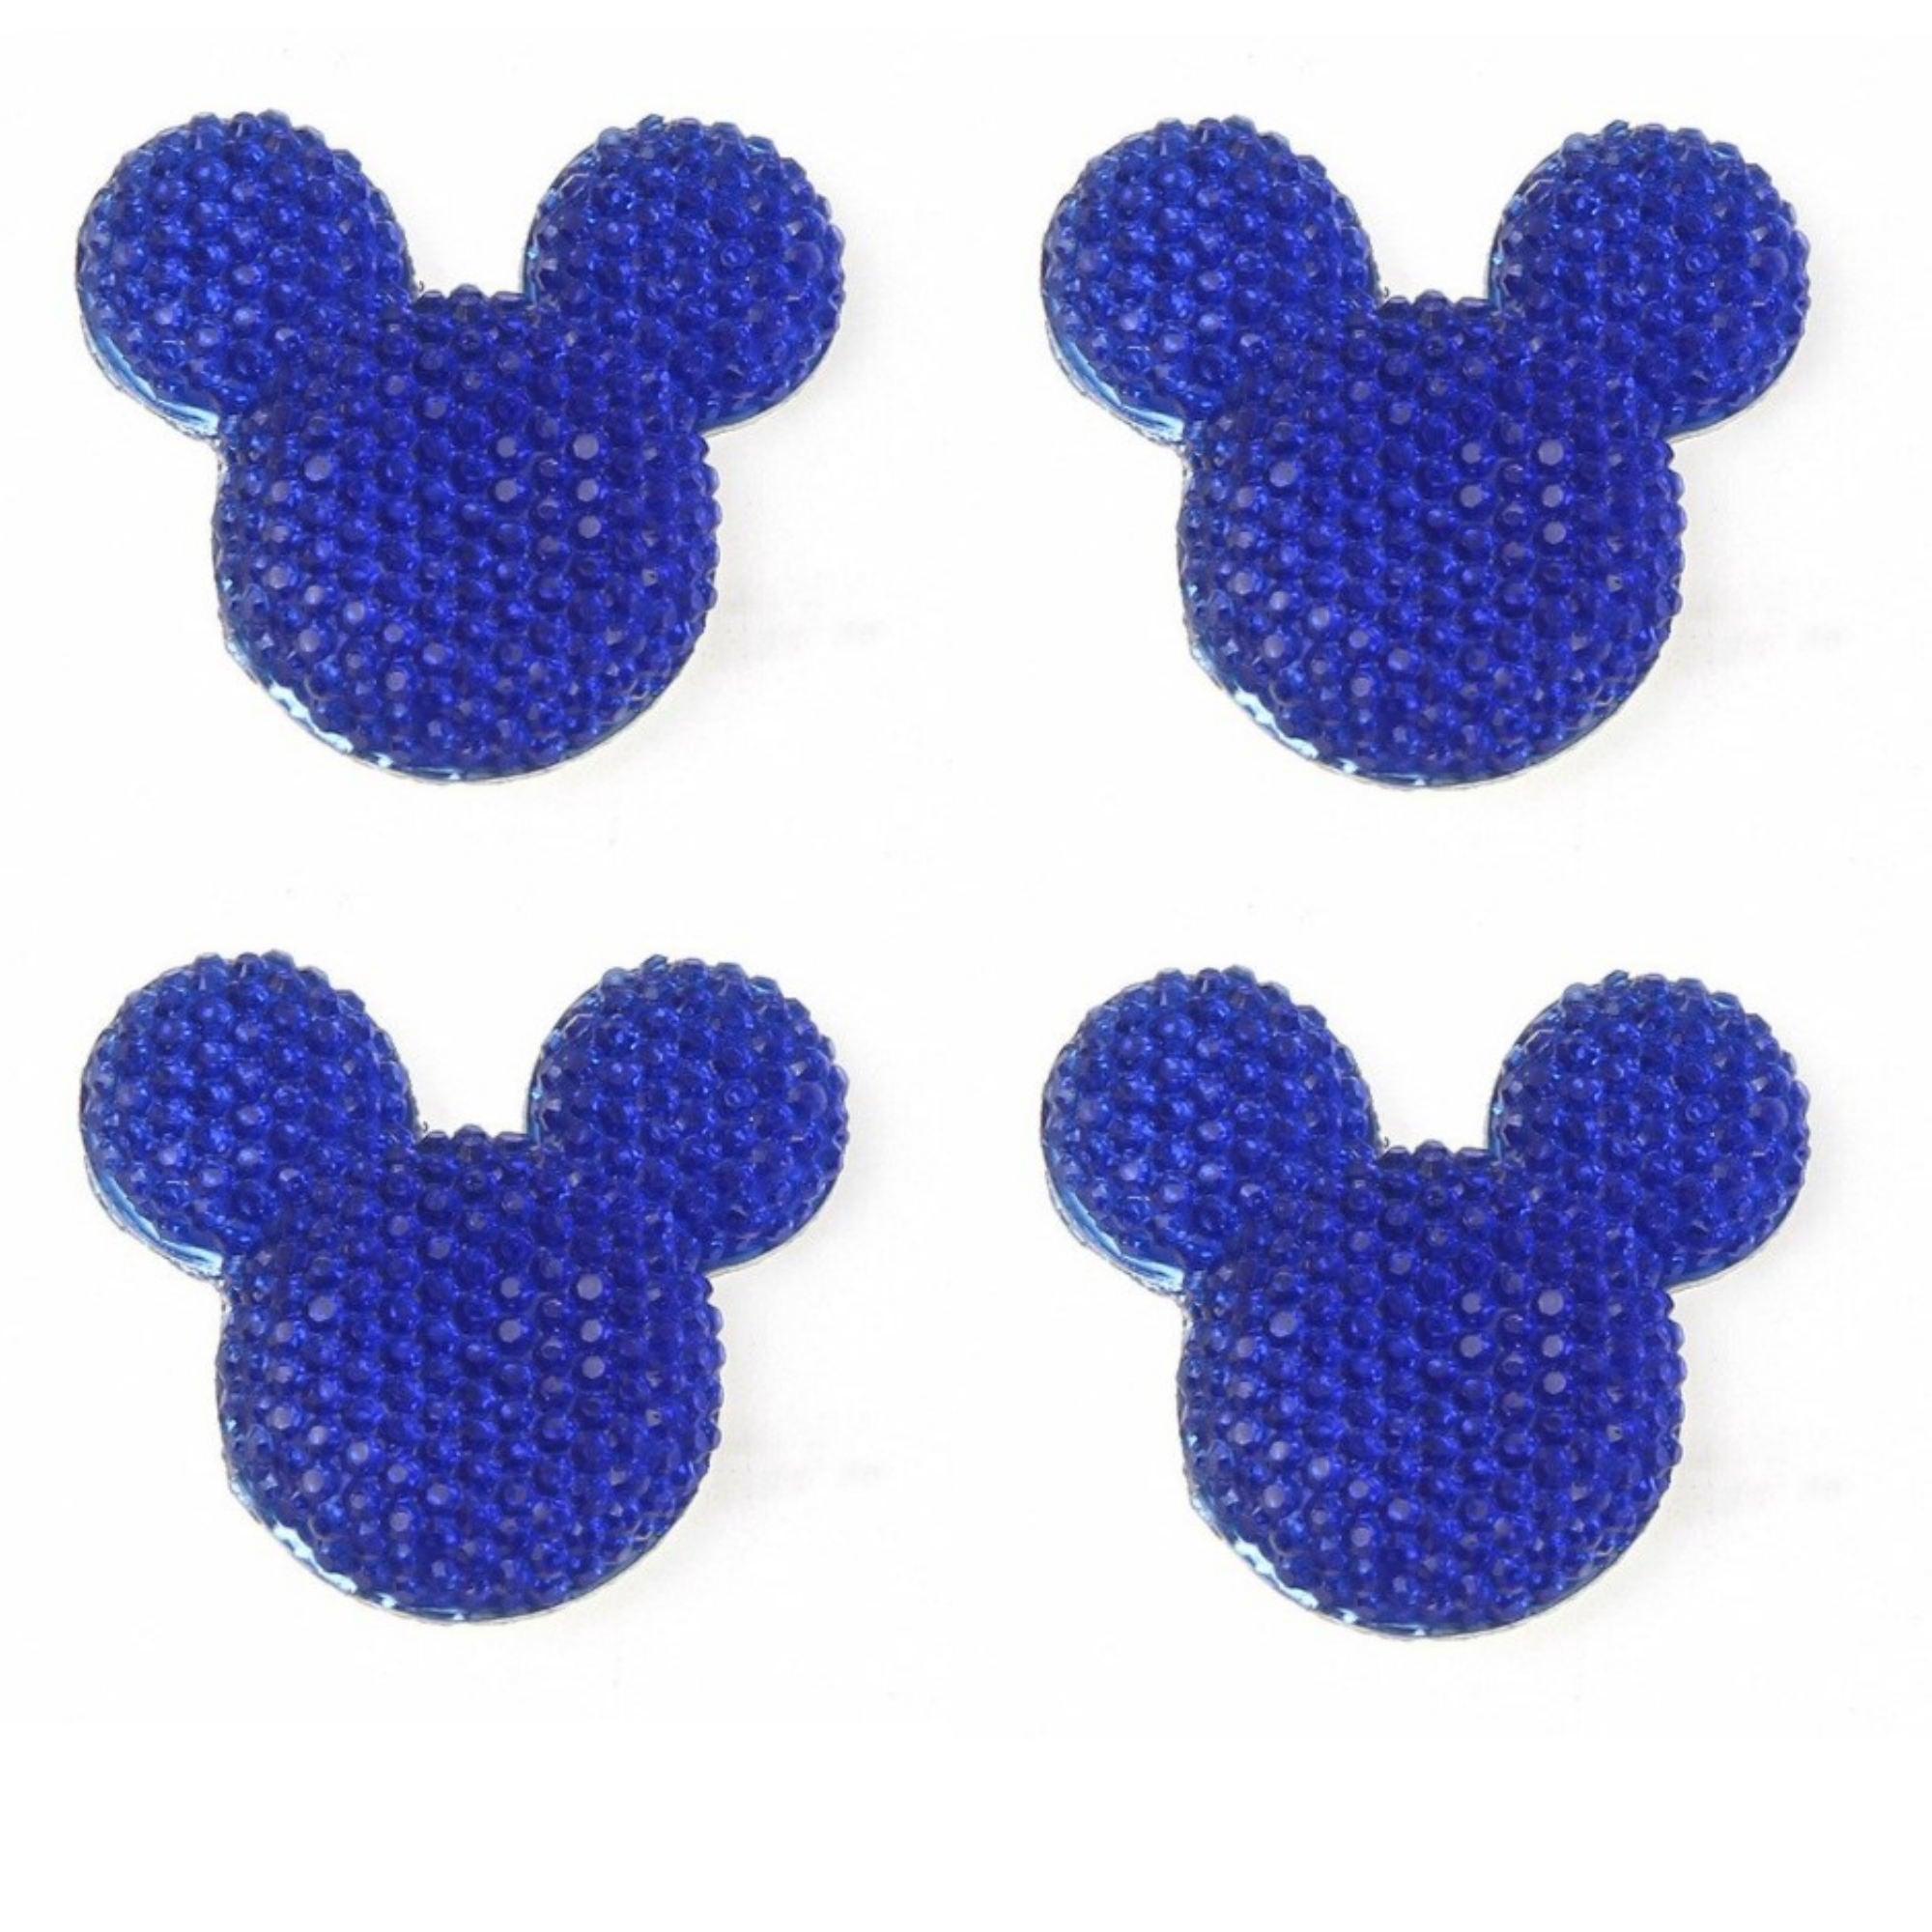 Disneyana Collection 1.25" Bling Blue Mouse Ears Scrapbook Embellishments by SSC Designs - 4 Pieces